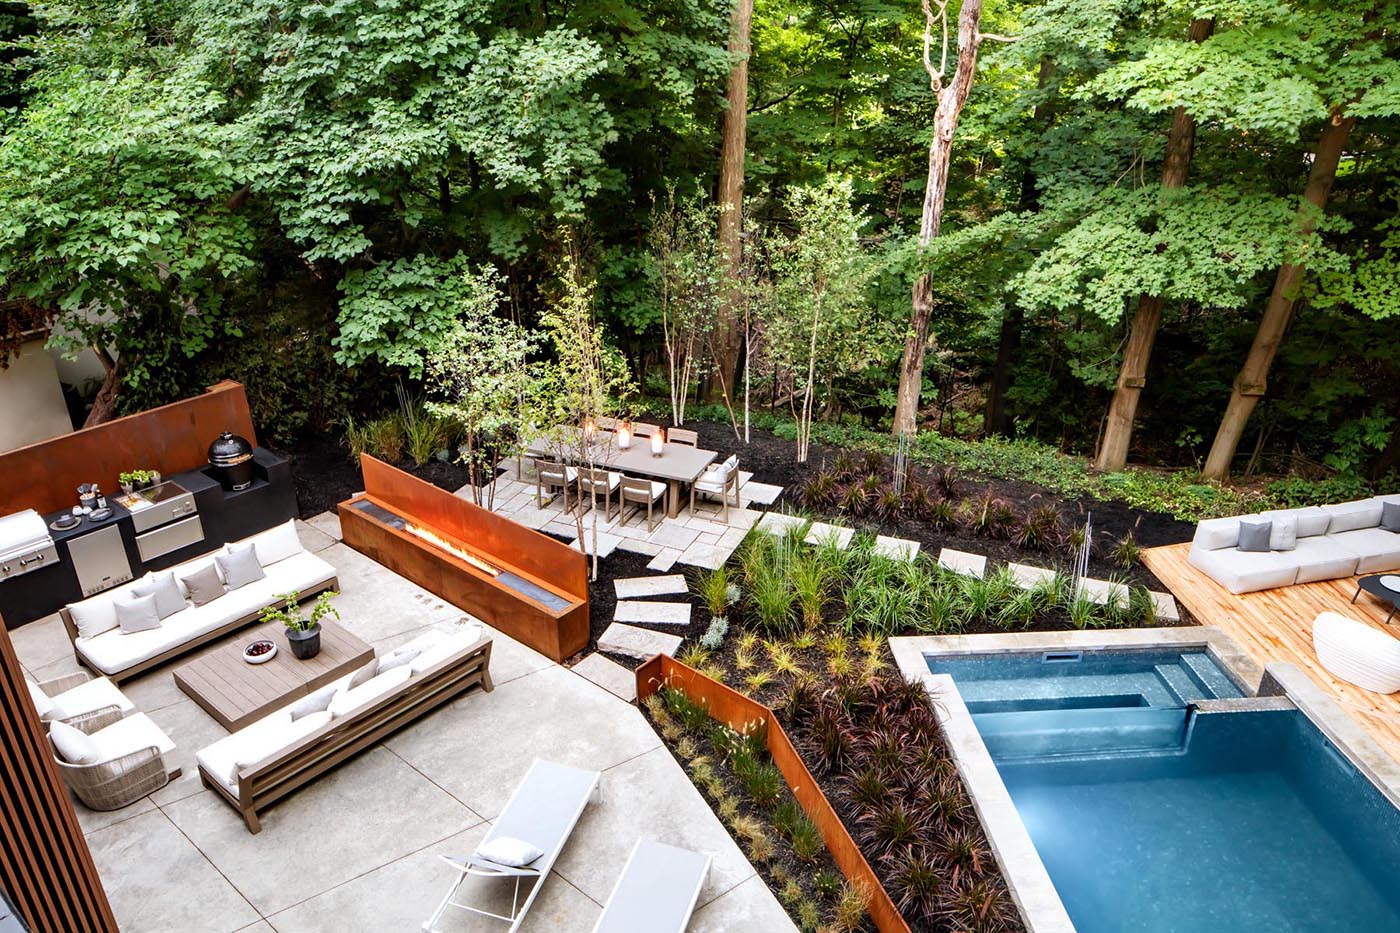 This modern outdoor space has been landscaped with a variety of different areas, including a swimming pool and deck, a lounge area with outdoor kitchen and fireplace, and a dining area.